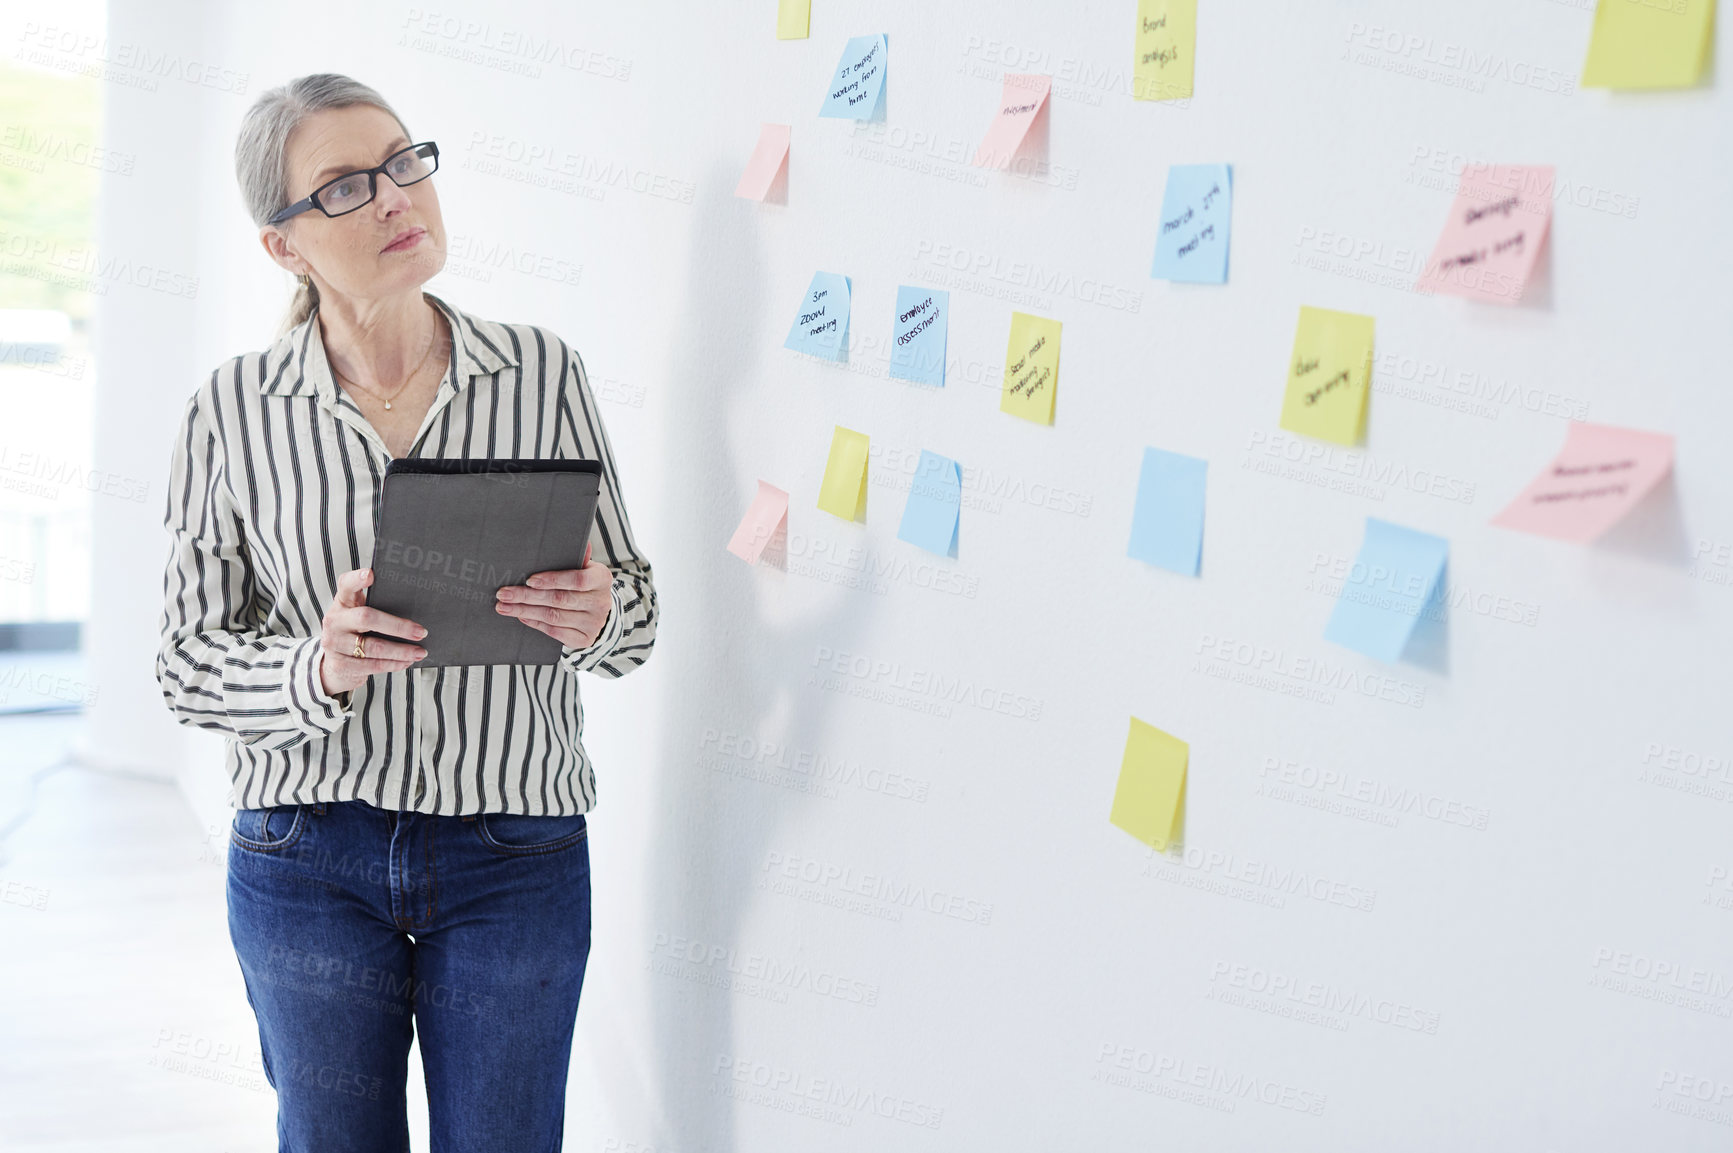 Buy stock photo Shot of a mature businesswoman using a digital tablet while brainstorming with notes on a wall in an office